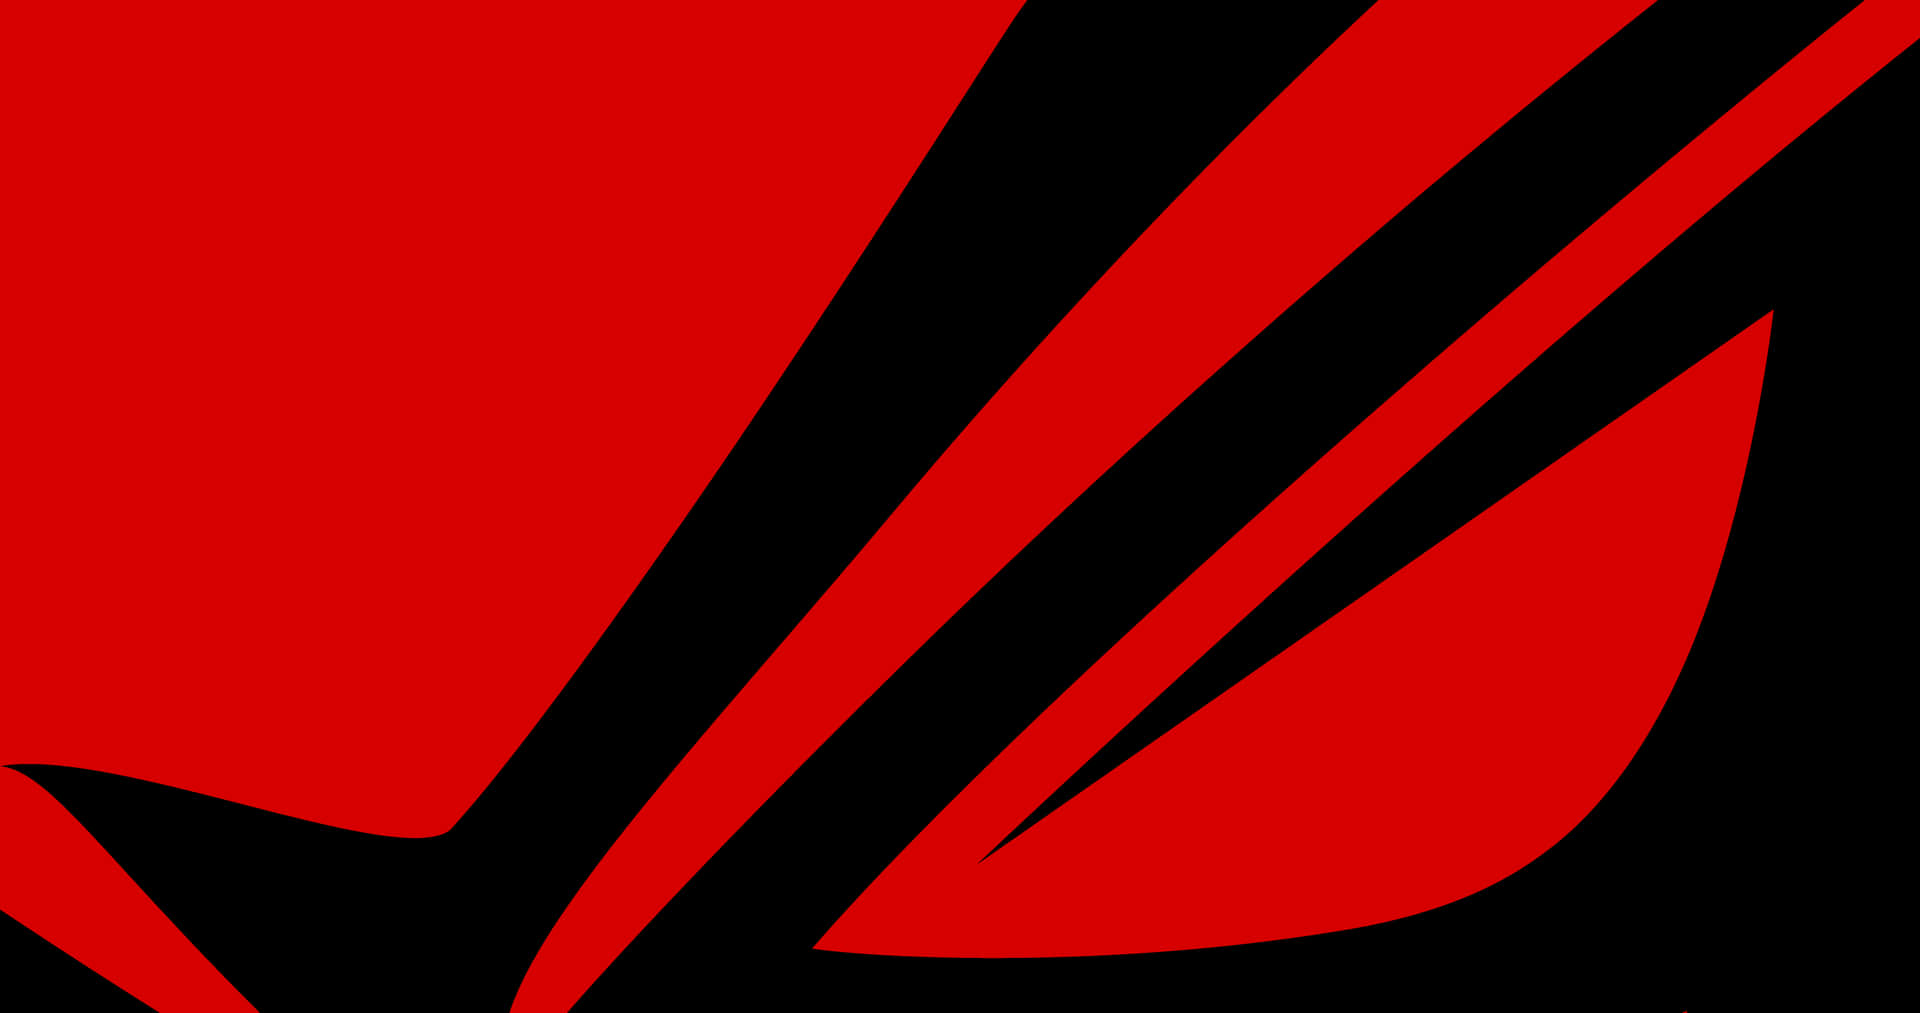 A Red And Black Logo With A Black Arrow